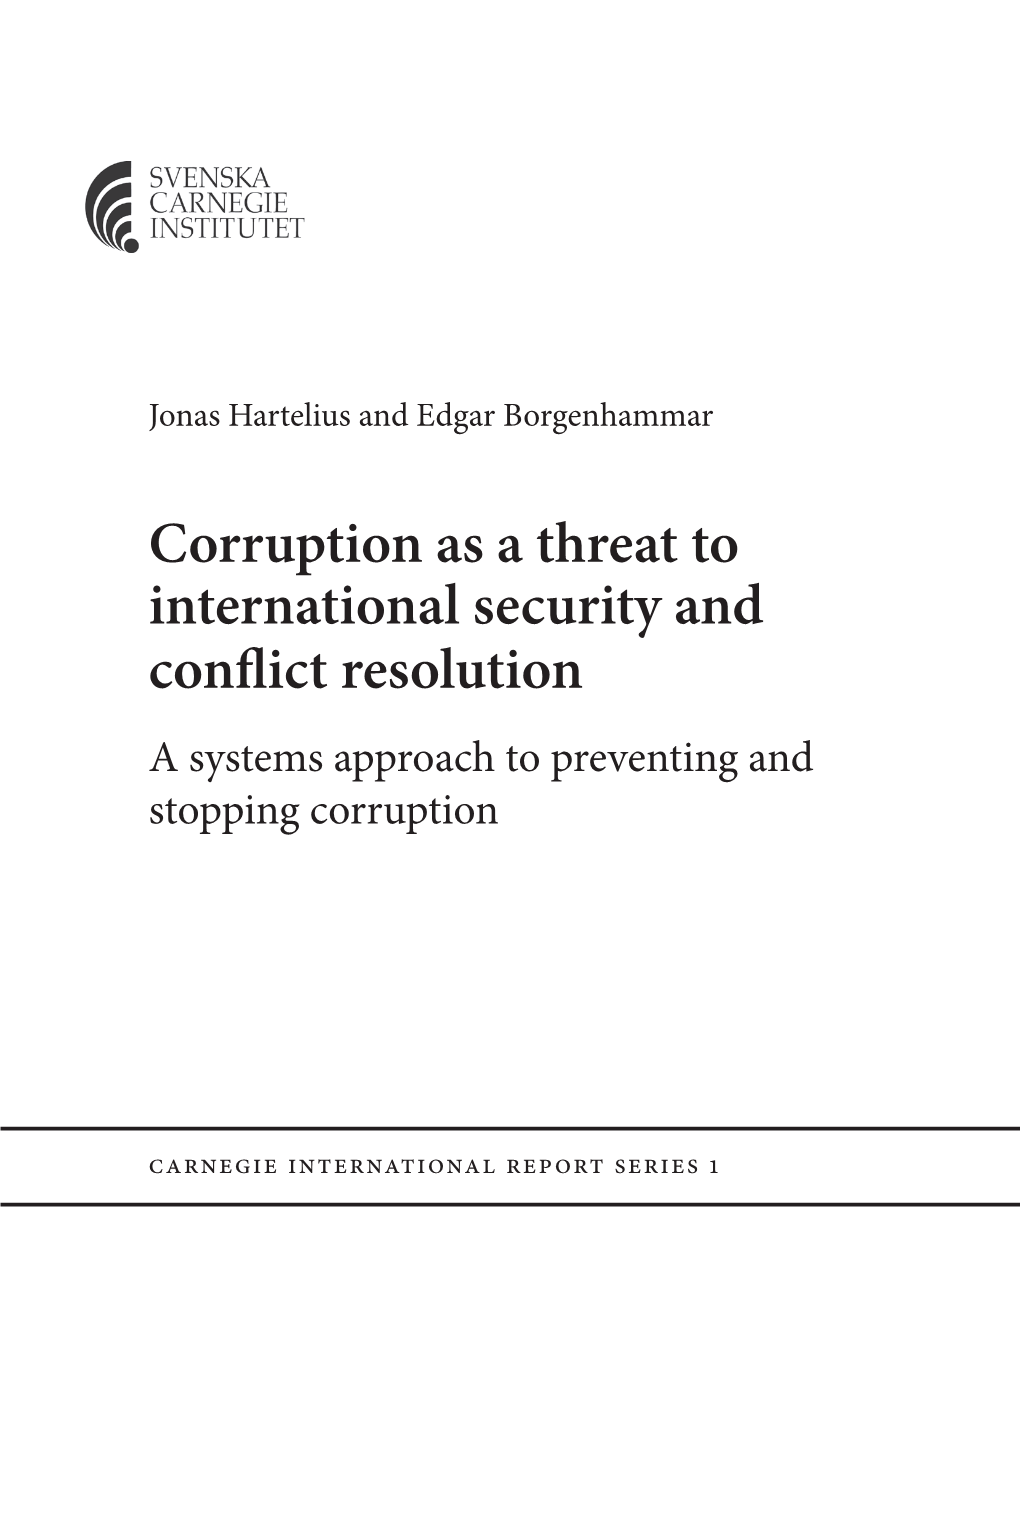 Corruption As a Threat to International Security and Conflict Resolution a Systems Approach to Preventing and Stopping Corruption